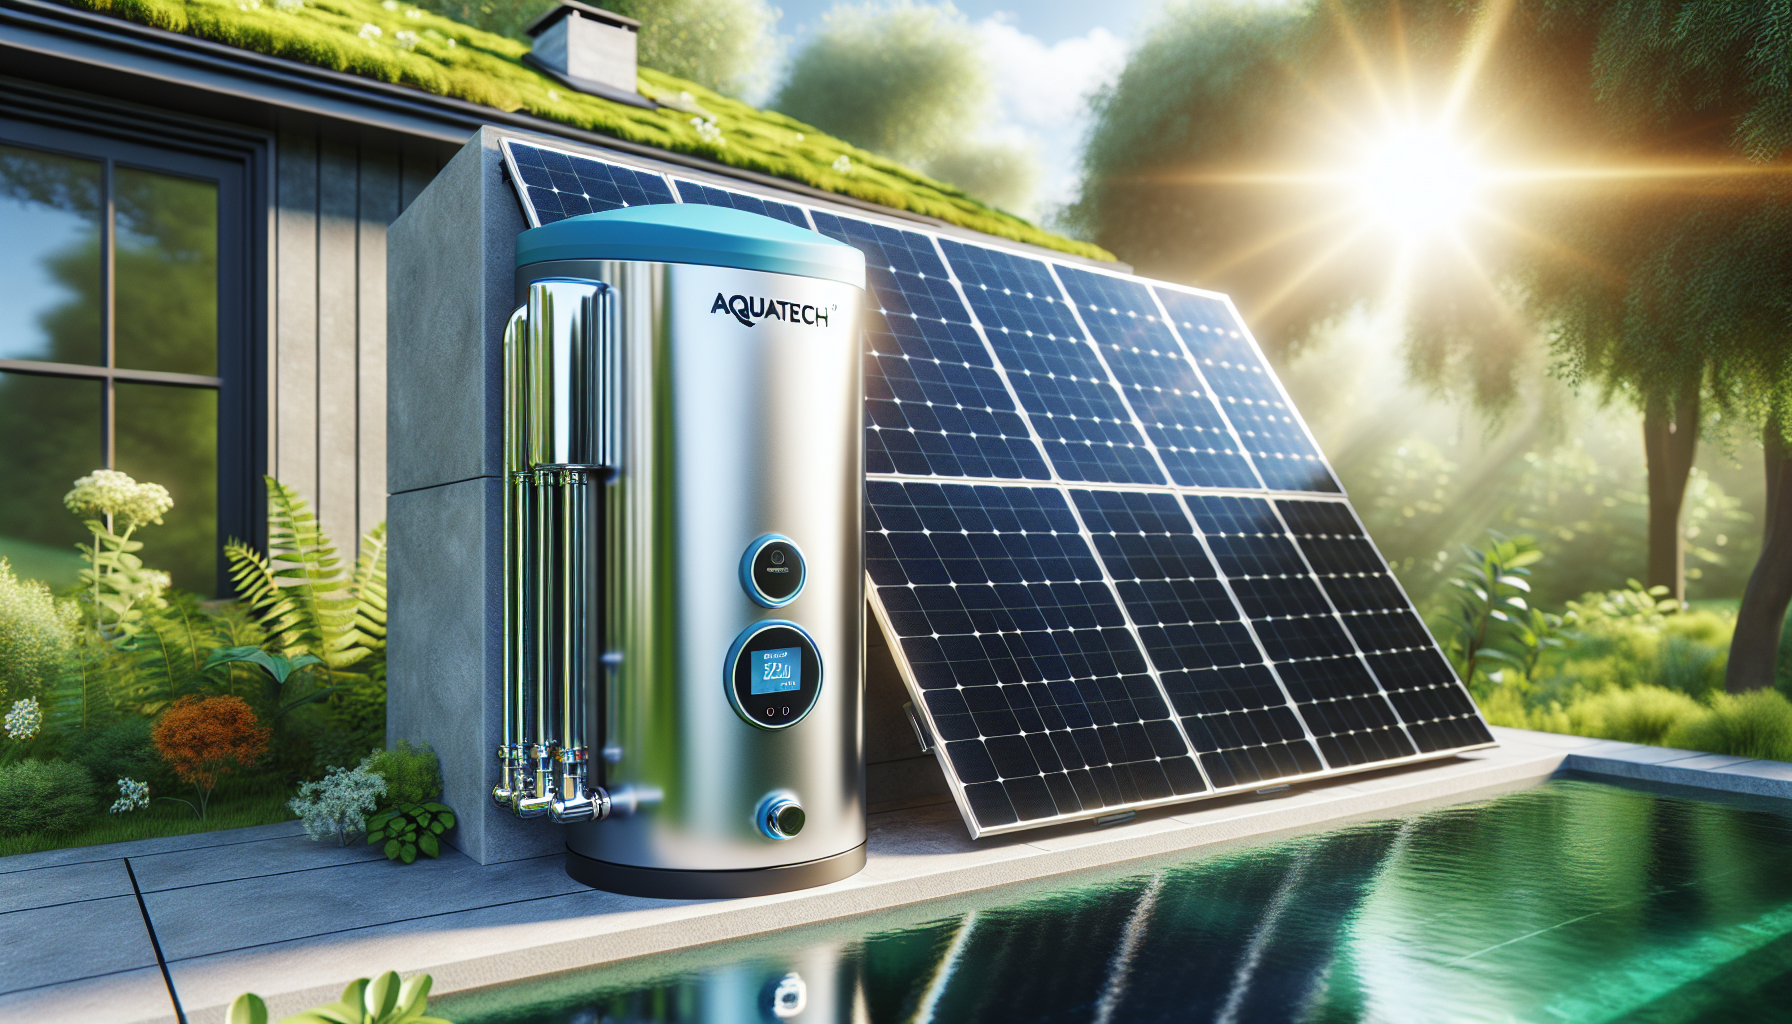 Aquatech hot water system with solar PV panels